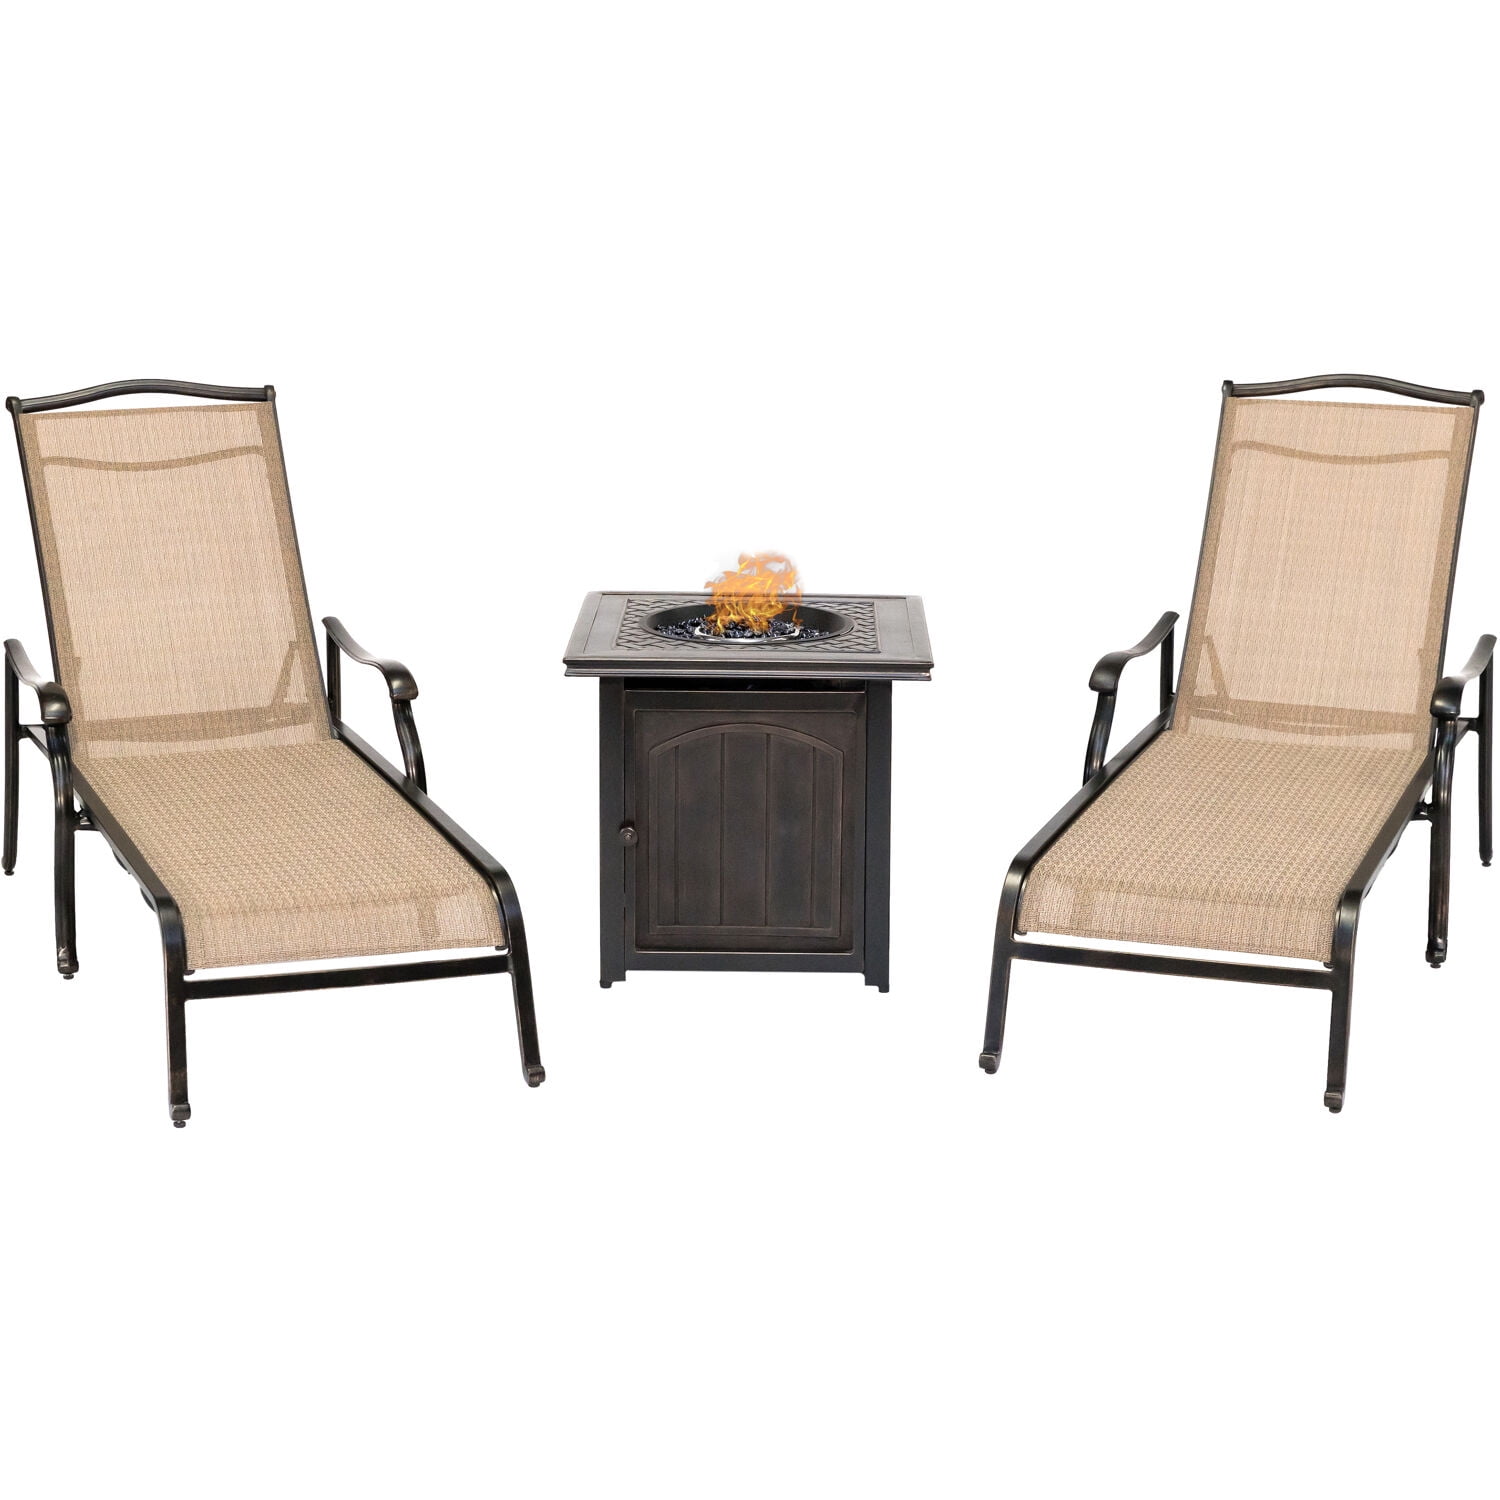 Hanover Monaco 3-Piece Lounge Set with 2 Chaise Lounges and a Square Fire Side Table - Walmart.com